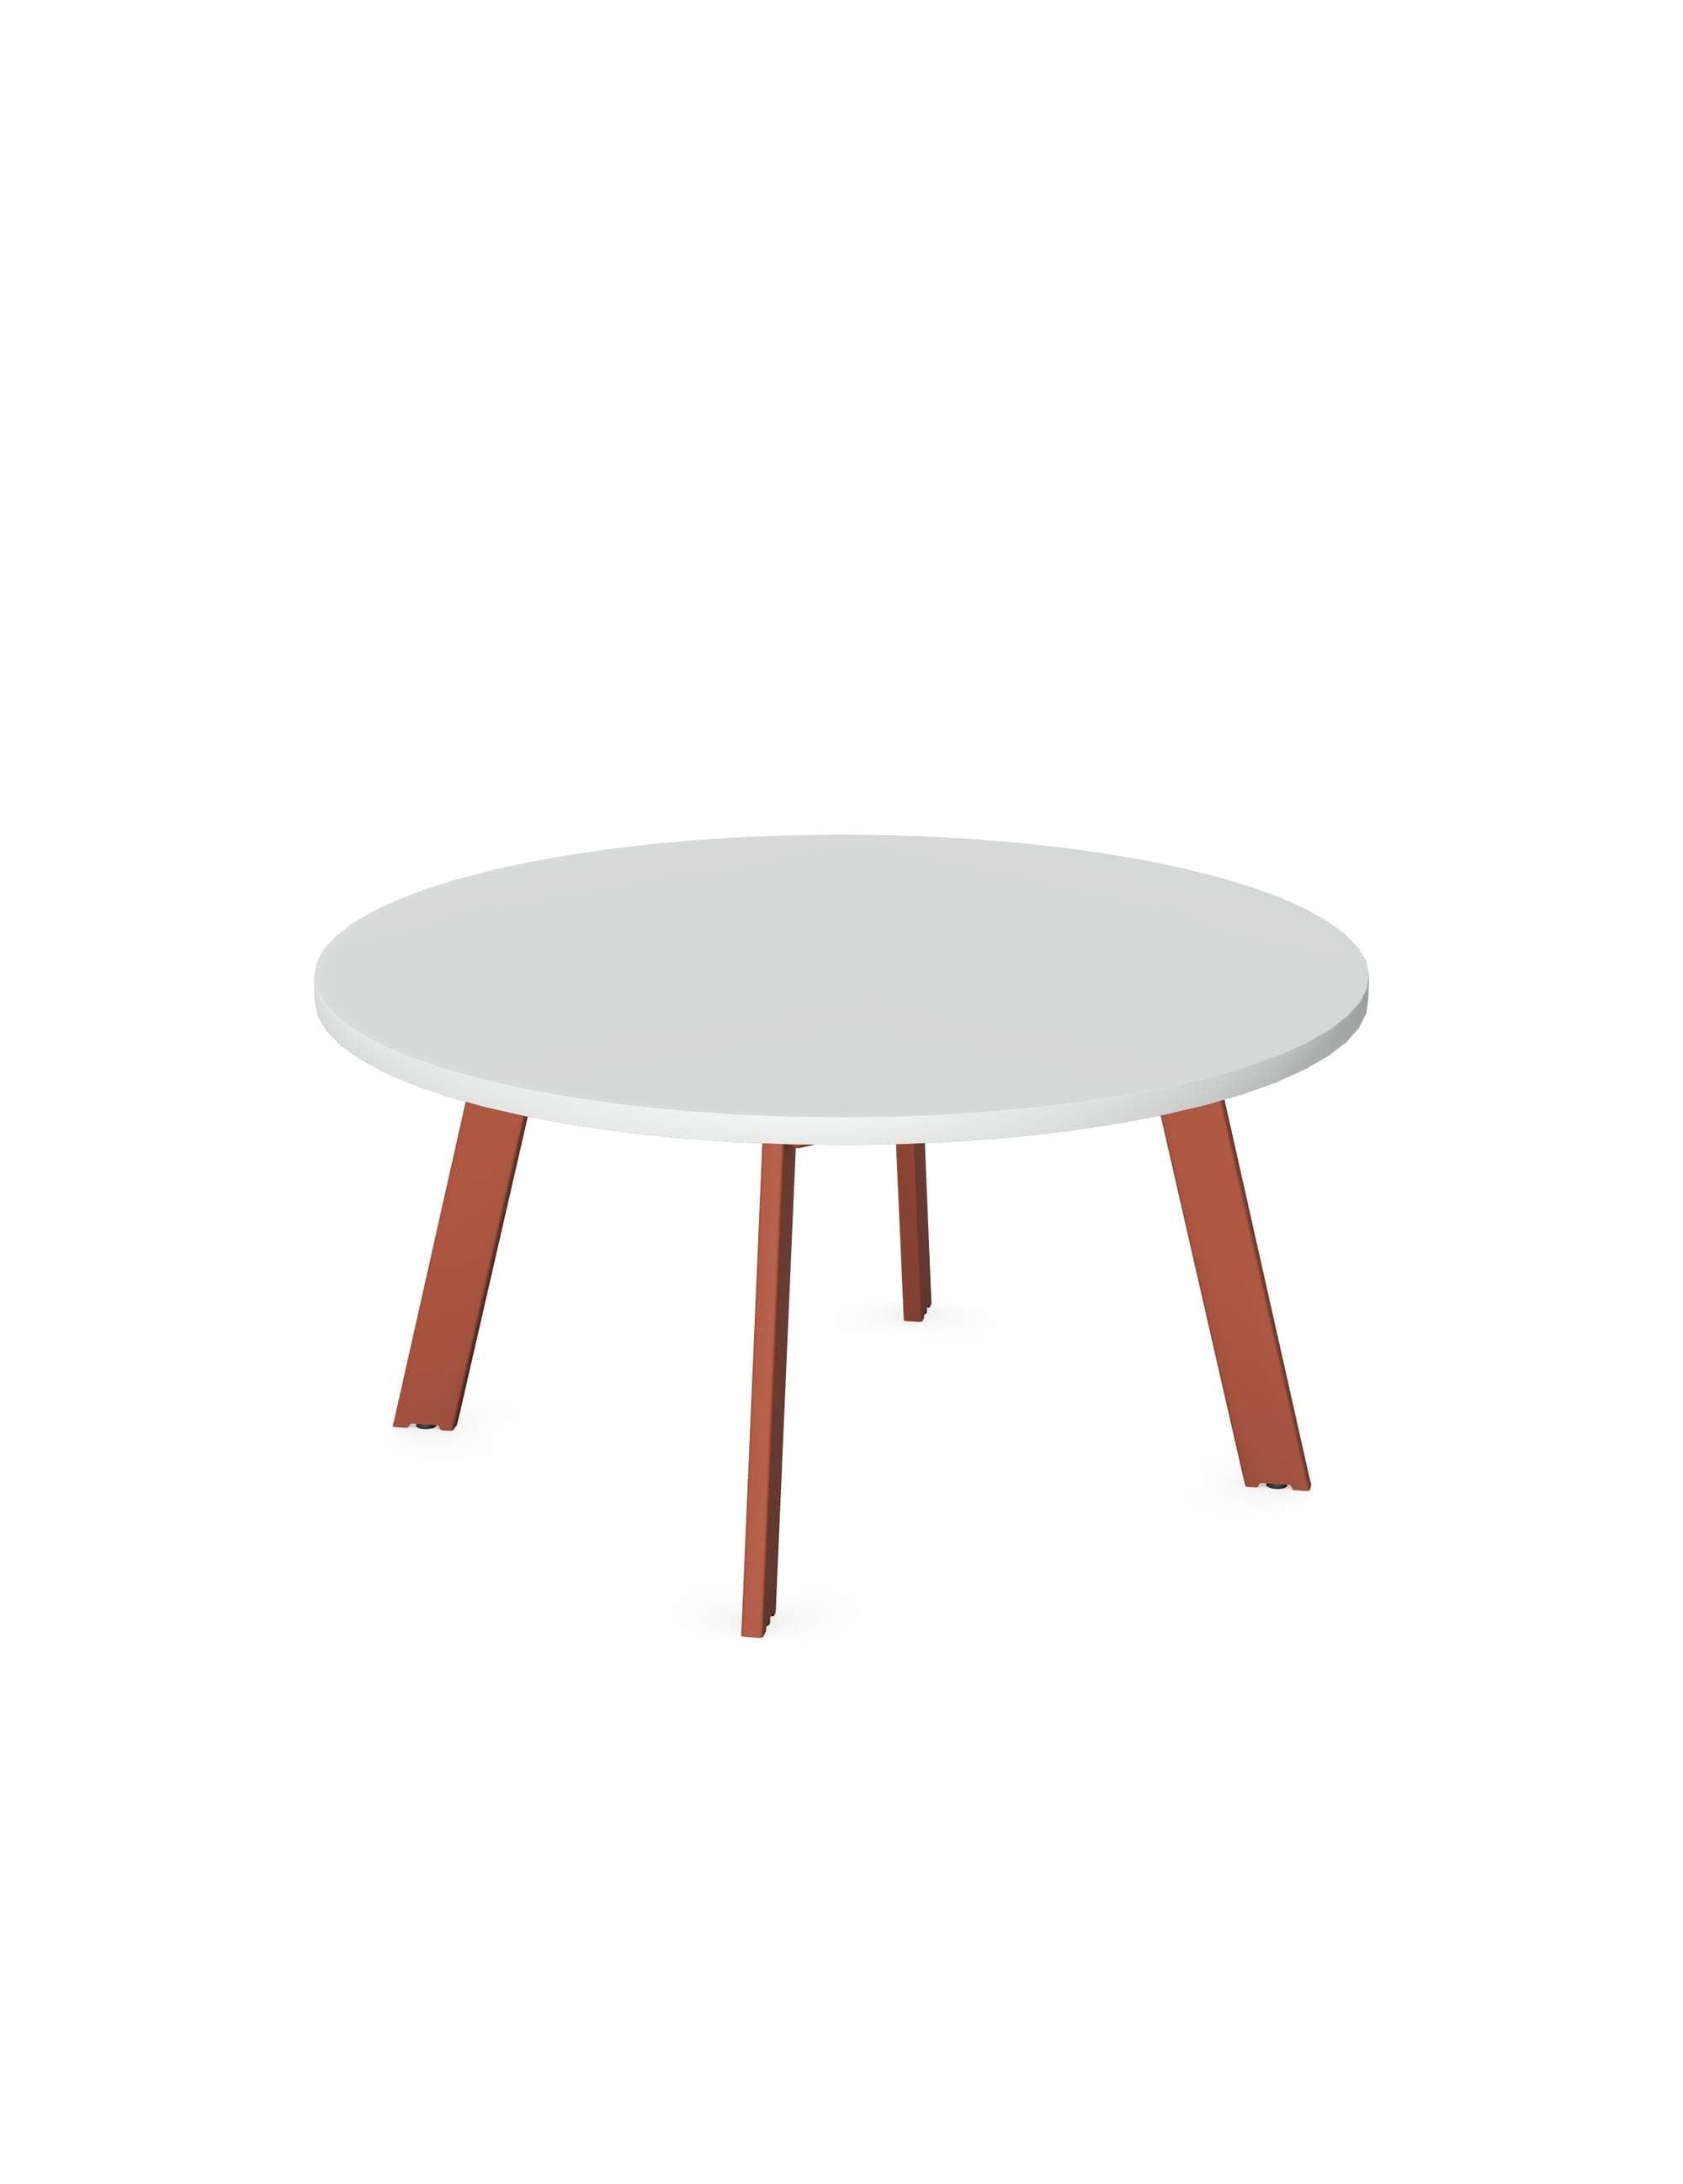 Axy-Line - Low Occasional Tables, Round Tops, Leg-A